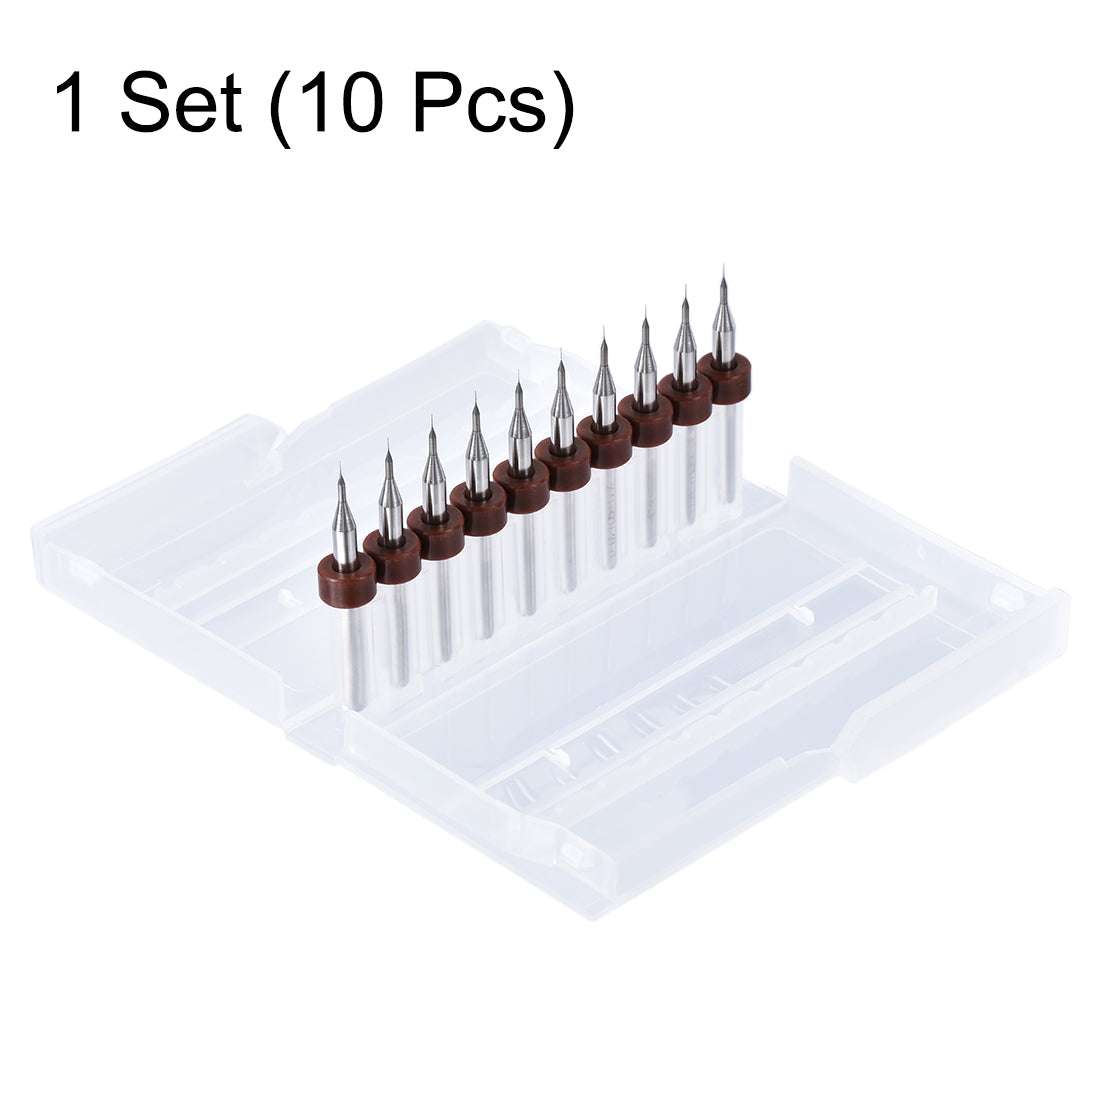 Uxcell Uxcell 1Set (10Pcs) 0.1mm Carbide CNC Engraving Circuit Board Micro PCB Drill Bits